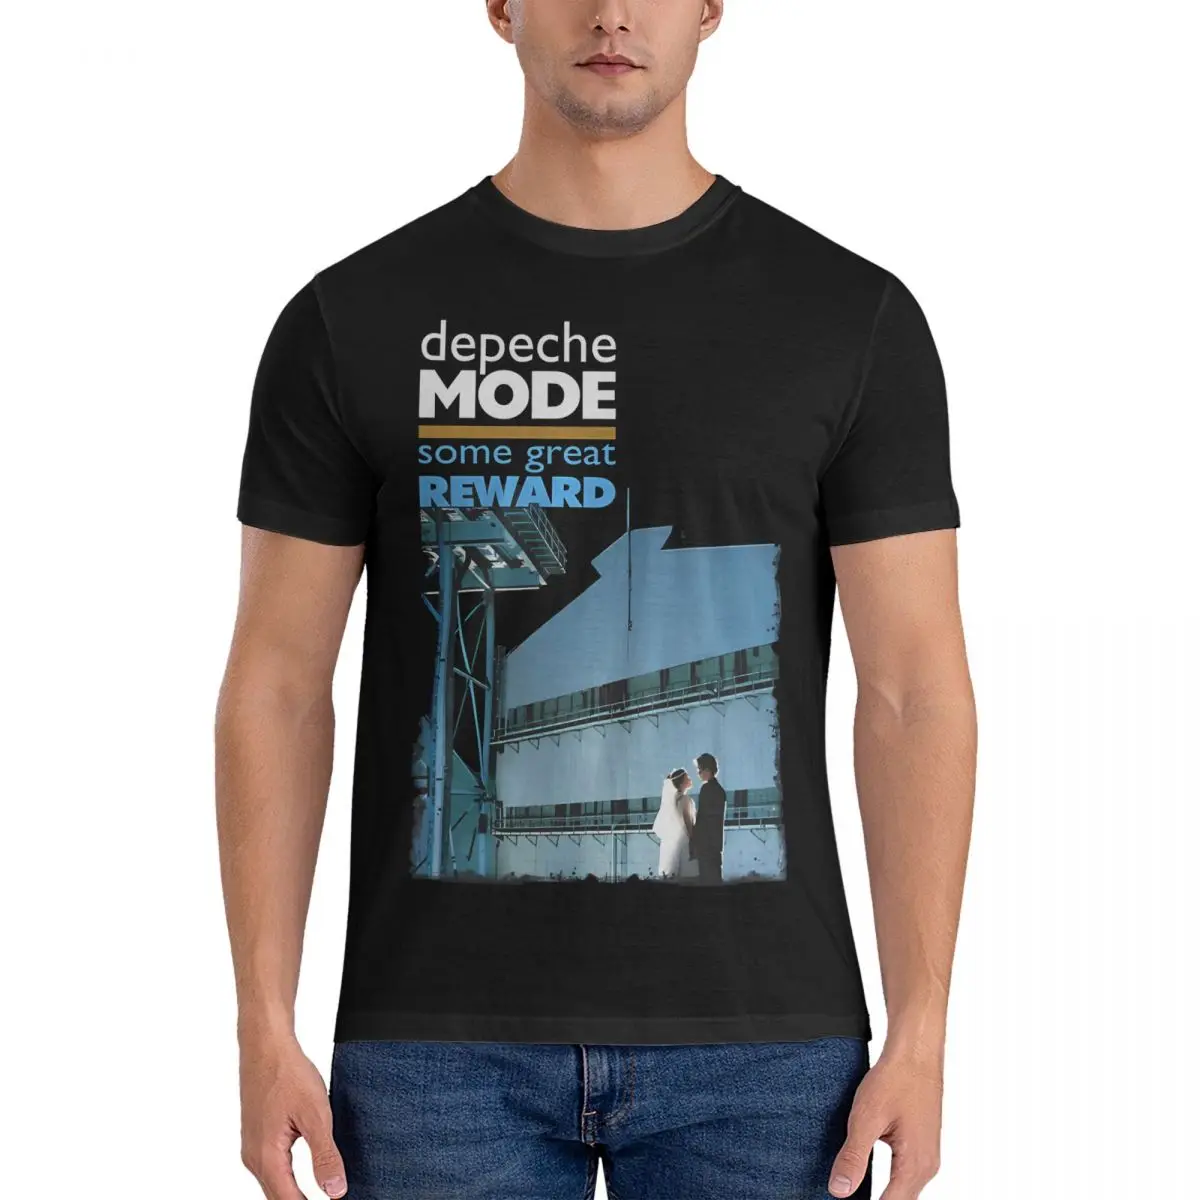 

Men Some Great Reward T Shirts Depeche Band Mode 100% Cotton Clothes Vintage Short Sleeve Round Neck Tees Gift Idea T-Shirt